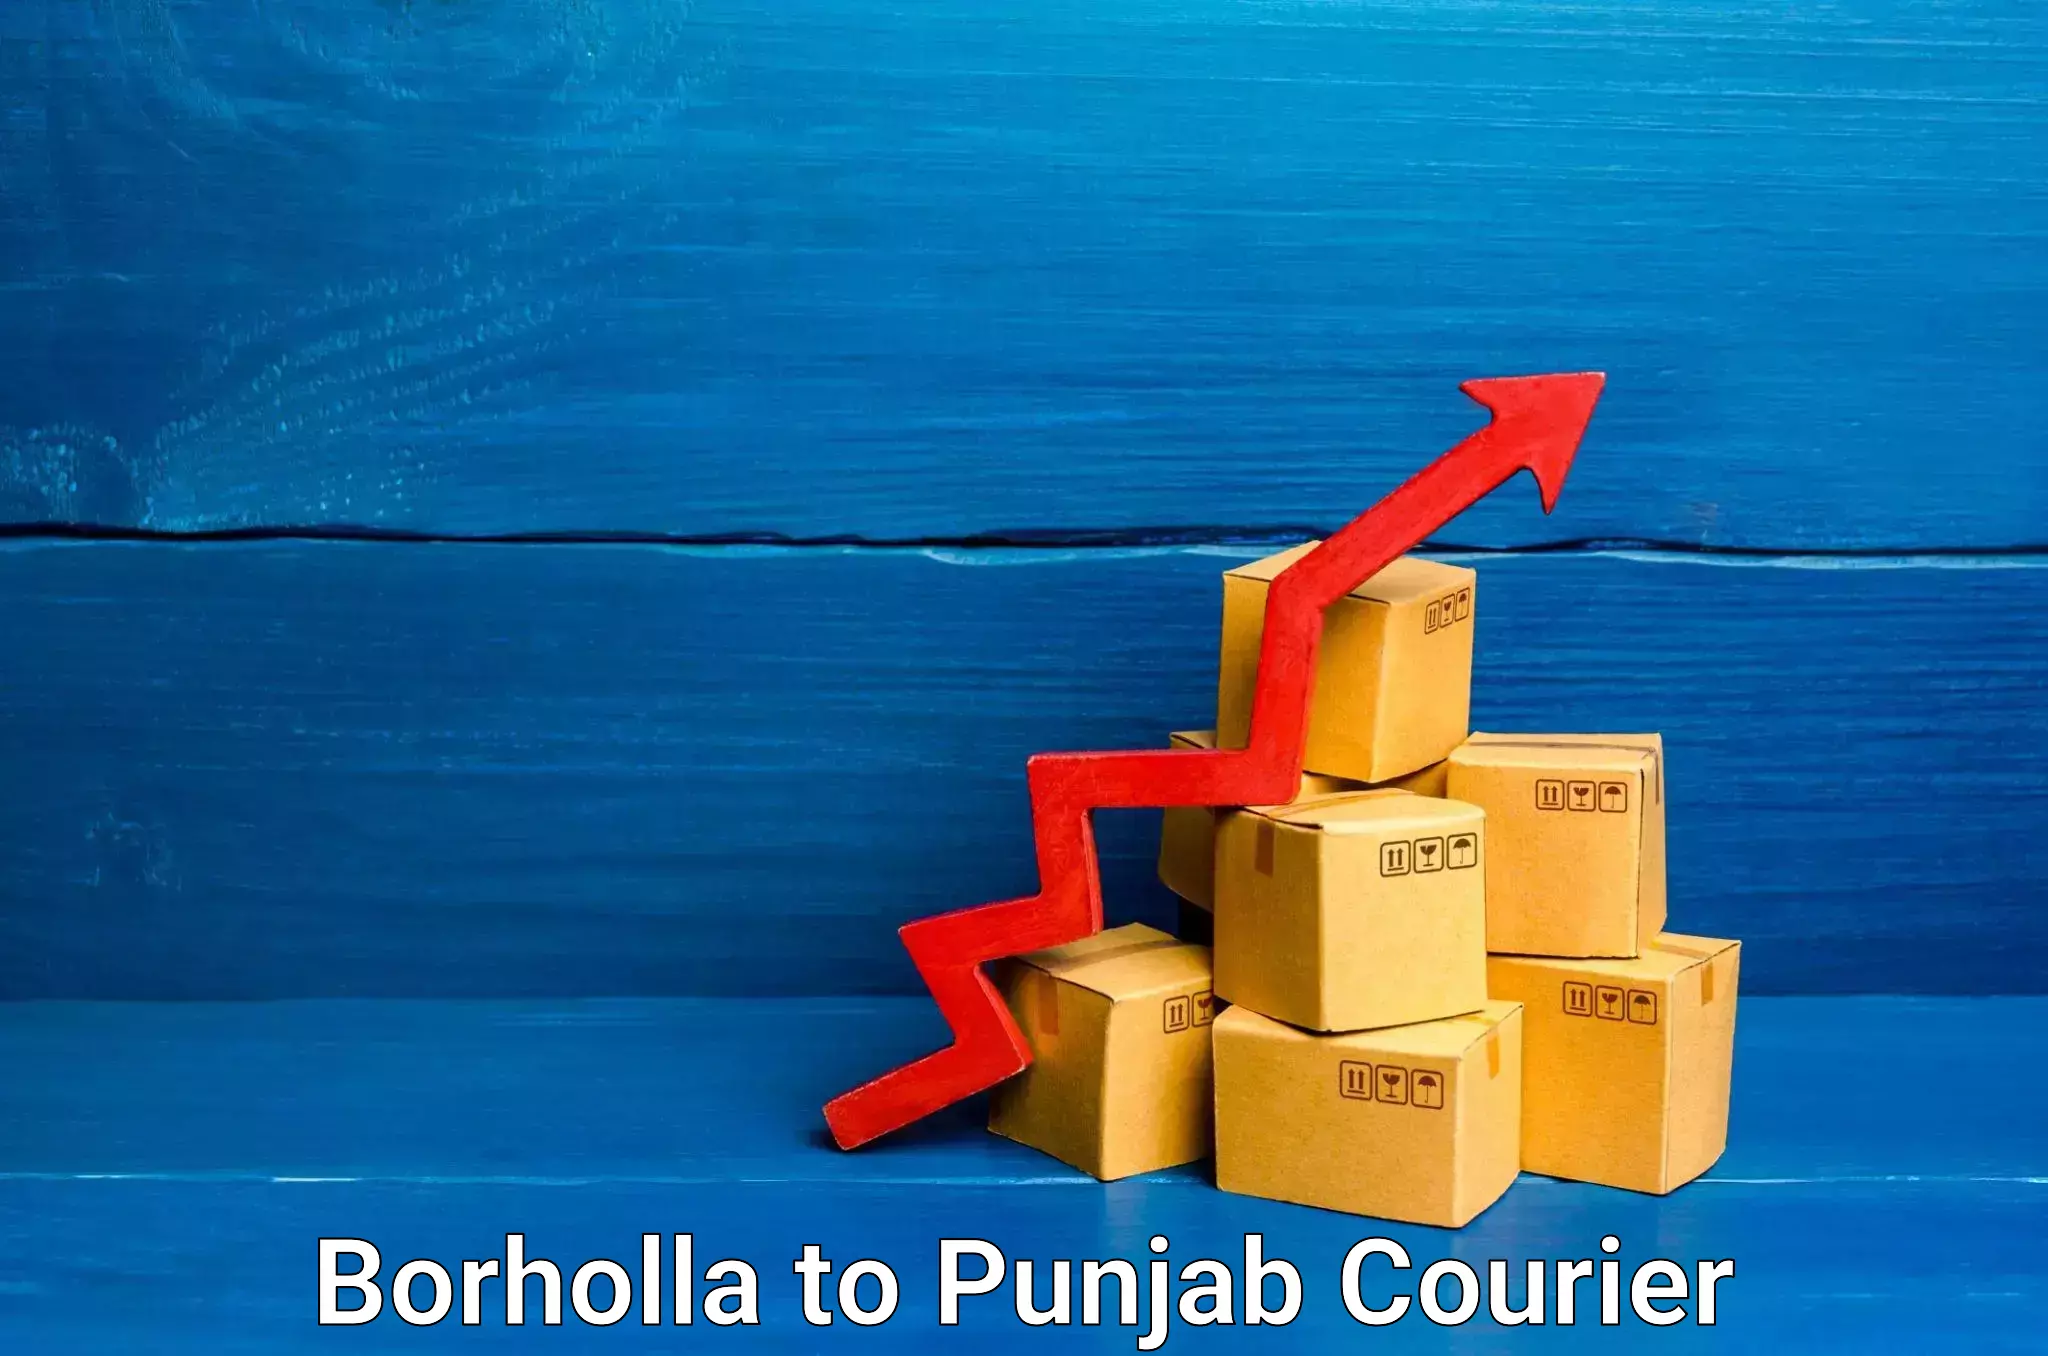 Advanced tracking systems in Borholla to Amritsar